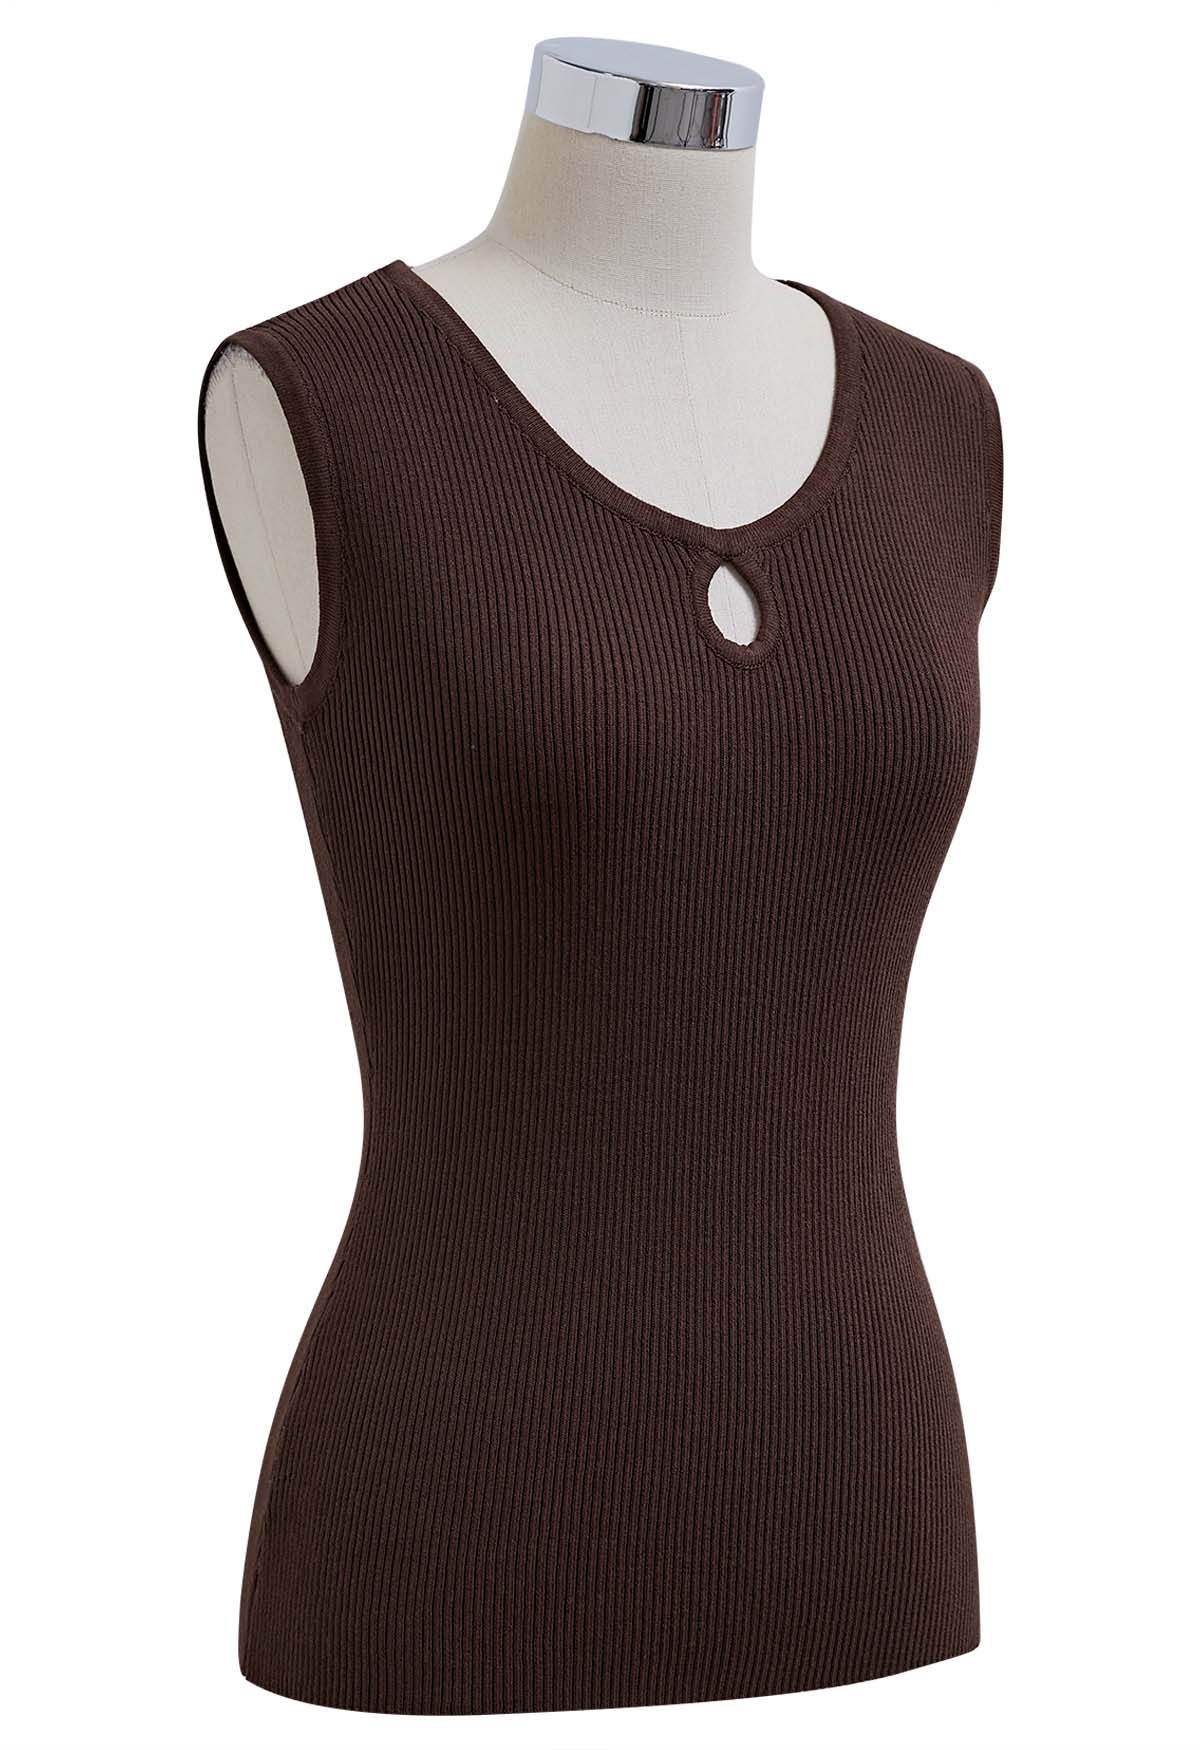 Cutout Detailing Sleeveless Knit Top in Brown